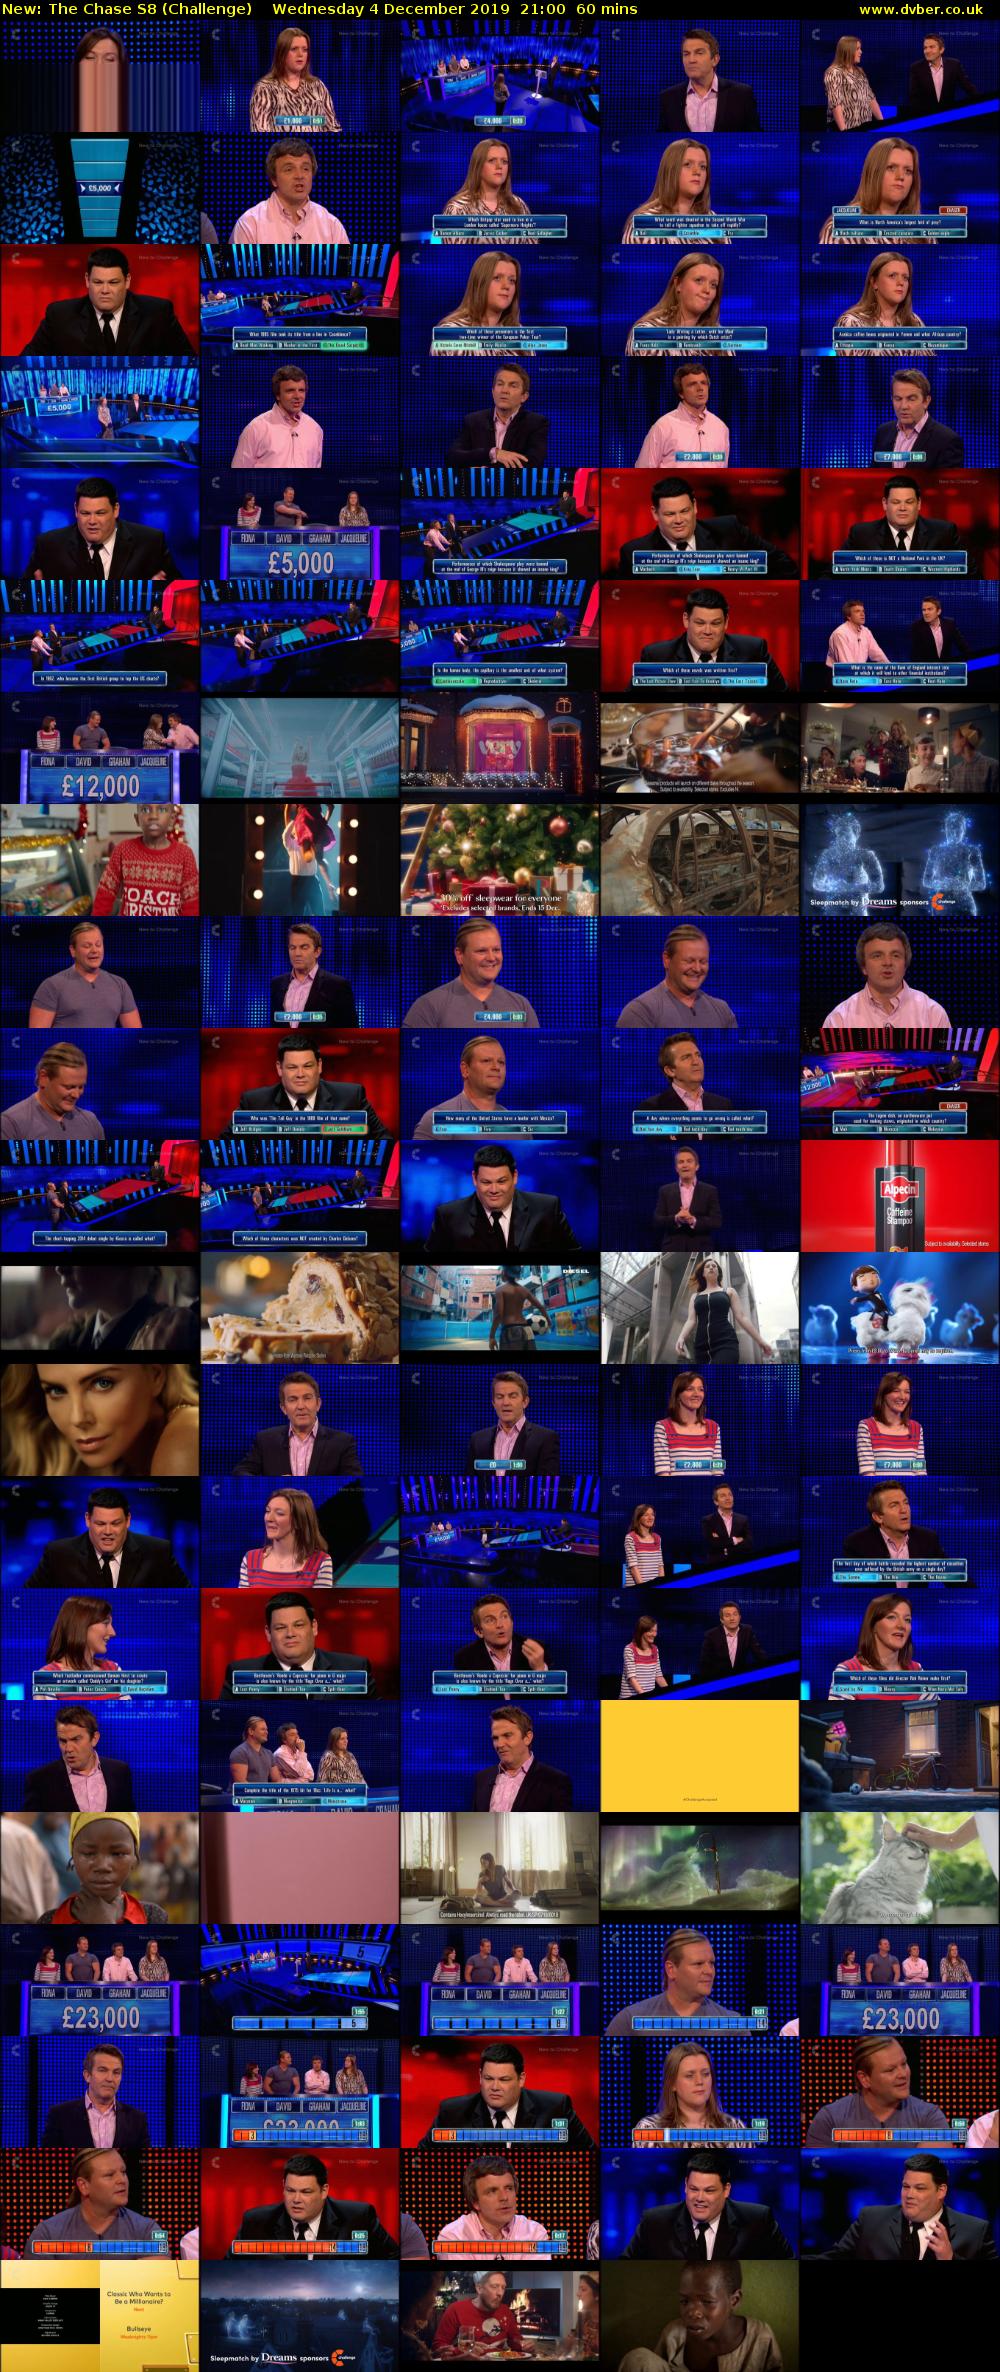 The Chase S8 (Challenge) Wednesday 4 December 2019 21:00 - 22:00